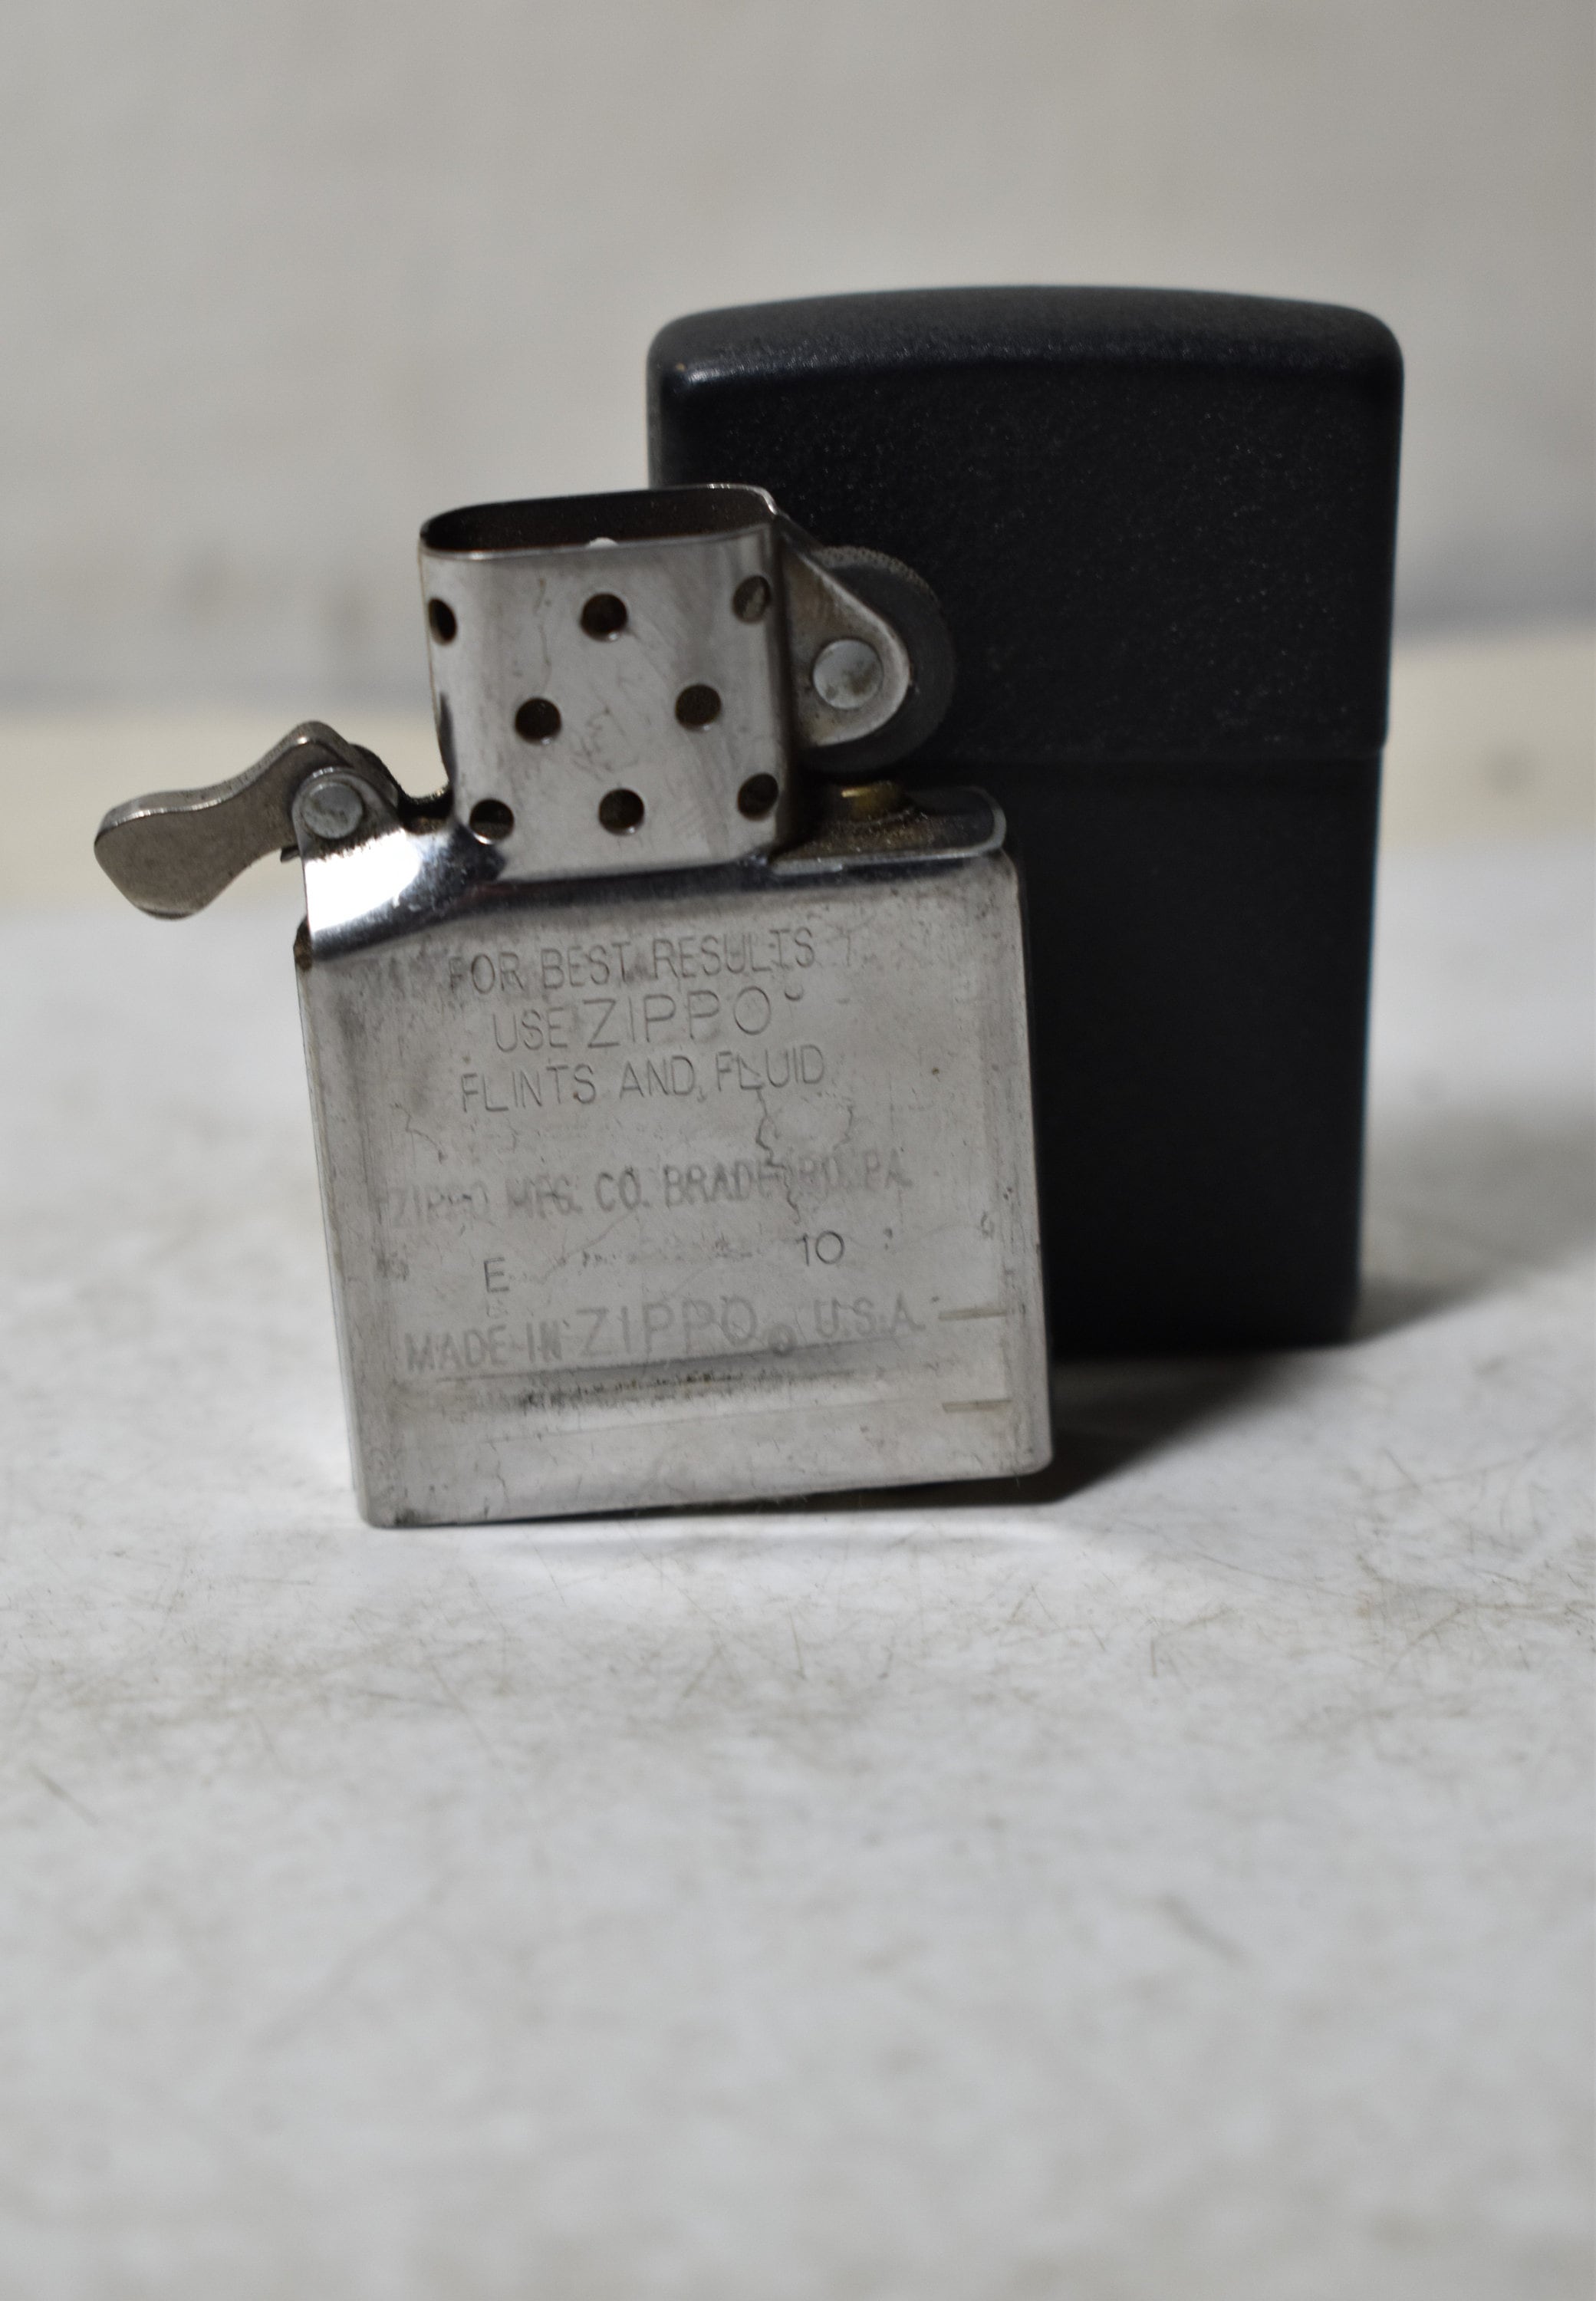 Vintage Zippo Tobacco Lighter Bradford PA Made in U.S.A 10 Collectible  working -  Denmark